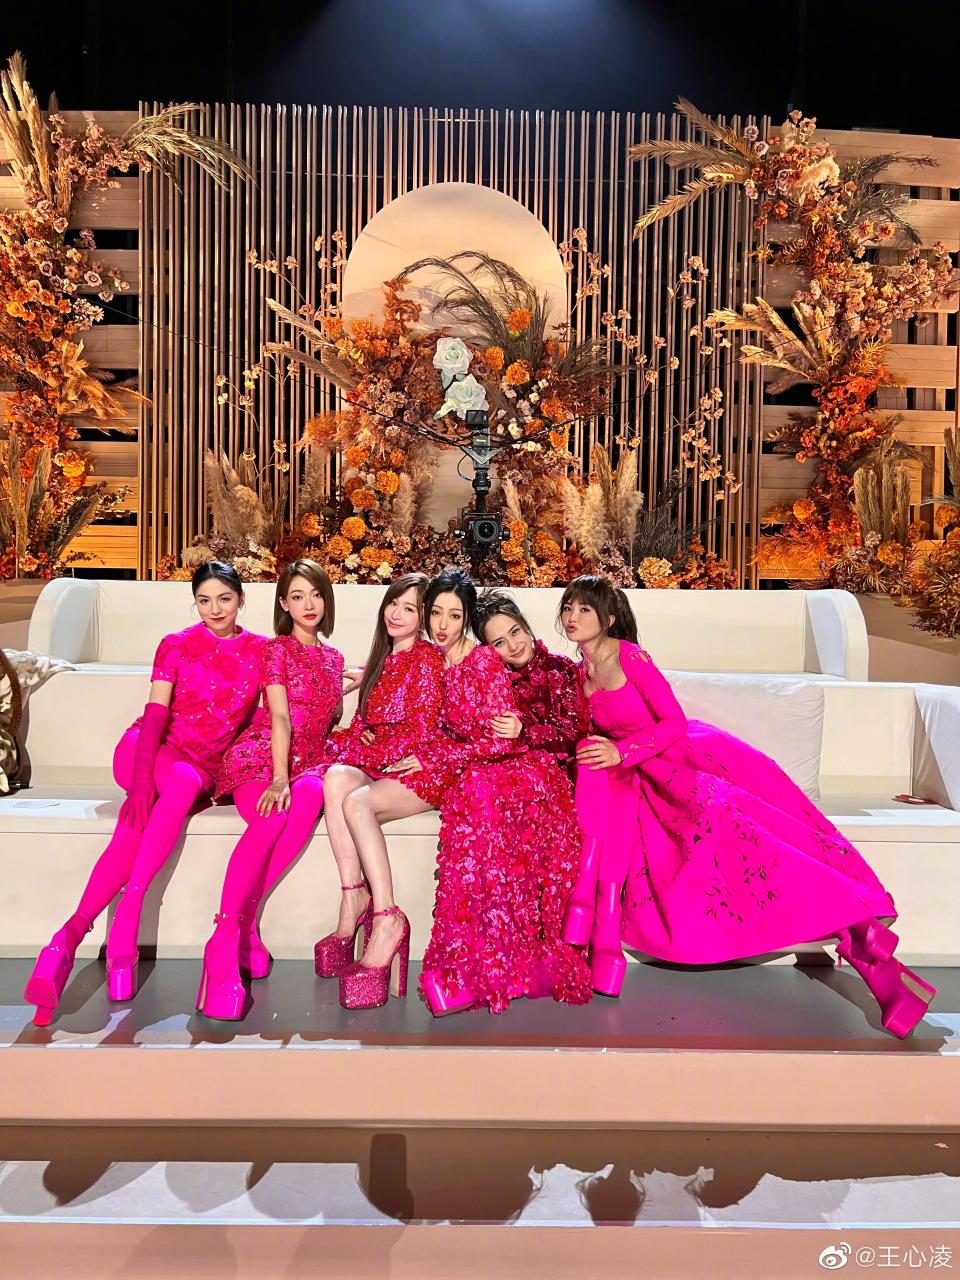 Cyndi Wang with her teammates at the reality show “Sisters Who Make Waves” finale, all wearing looks from Valentino’s Pink PP collection. - Credit: Weibo